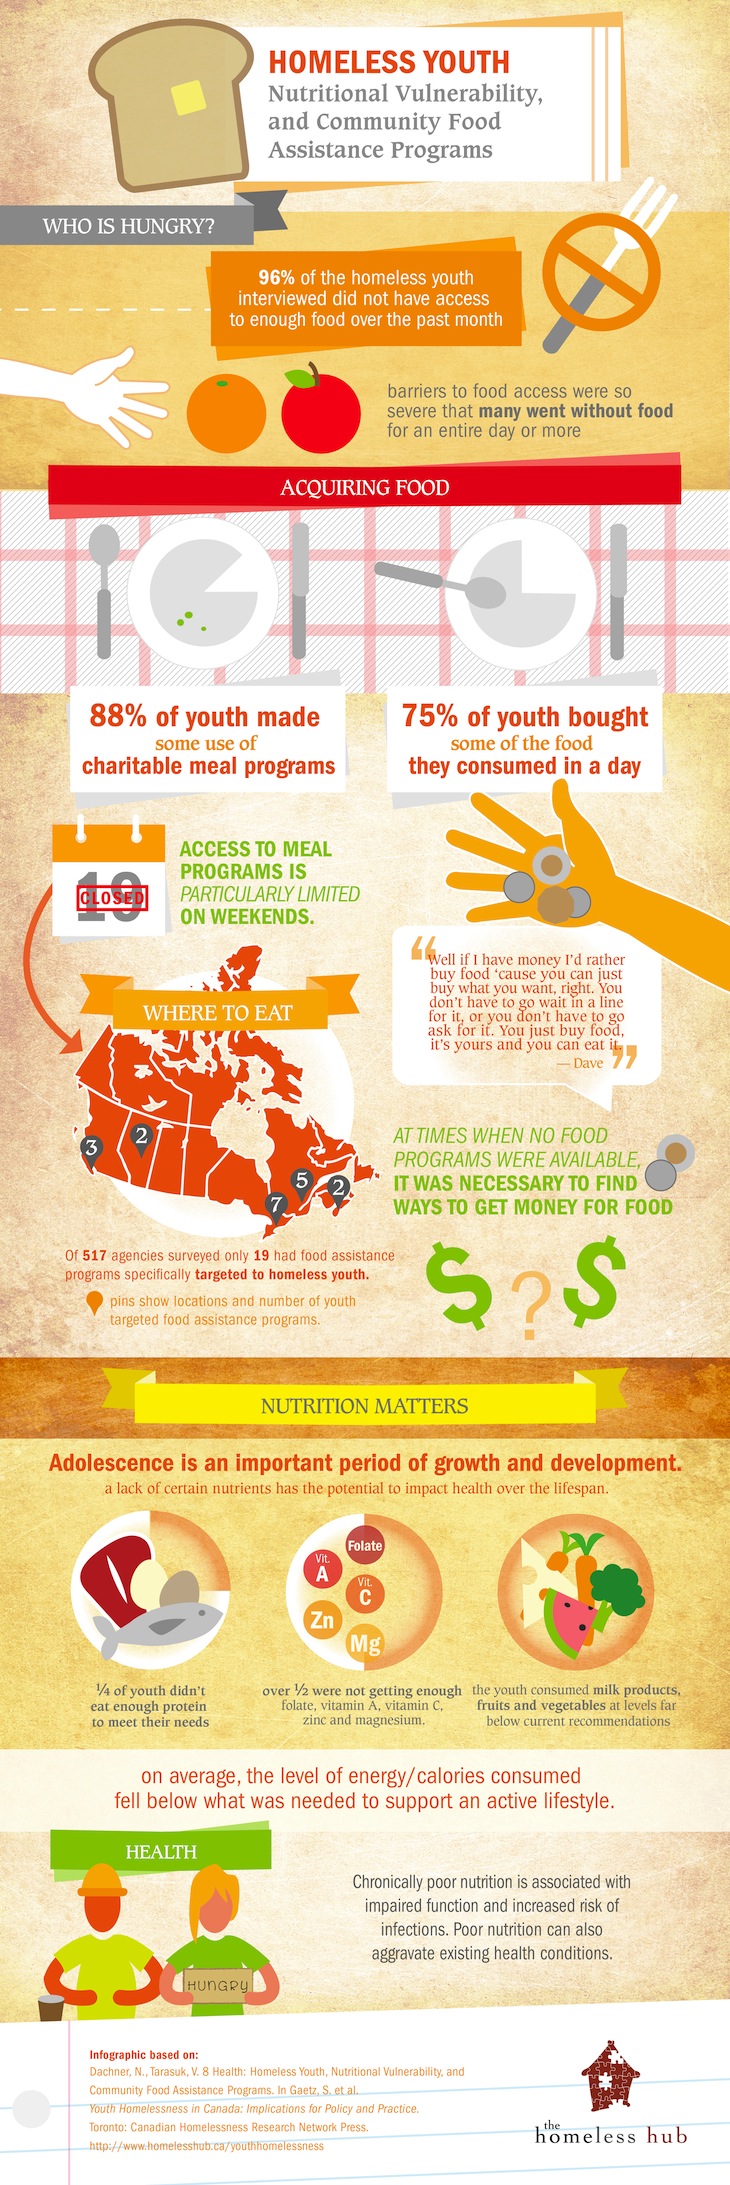 Homeless Youth, Nutritional Vulnerability, and Community Food Assistance Programs info graphic based on chapter 8 of the Youth Homelessness book